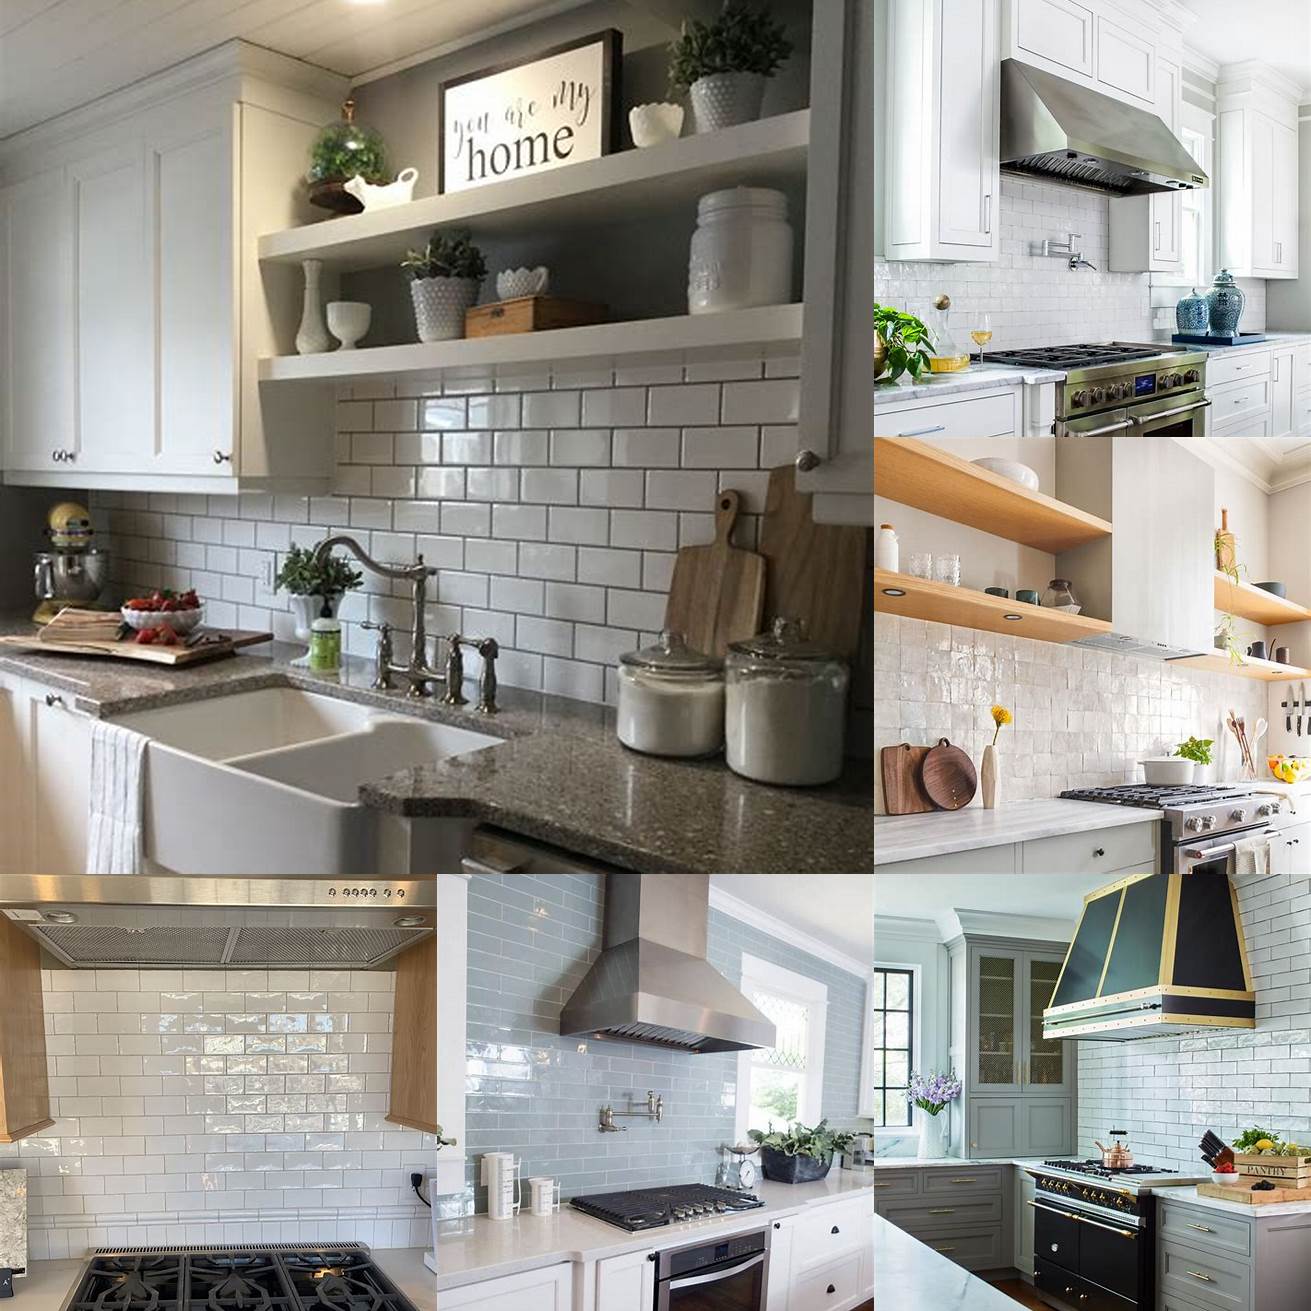 A galley kitchen with a subway tile backsplash creates a timeless and classic look